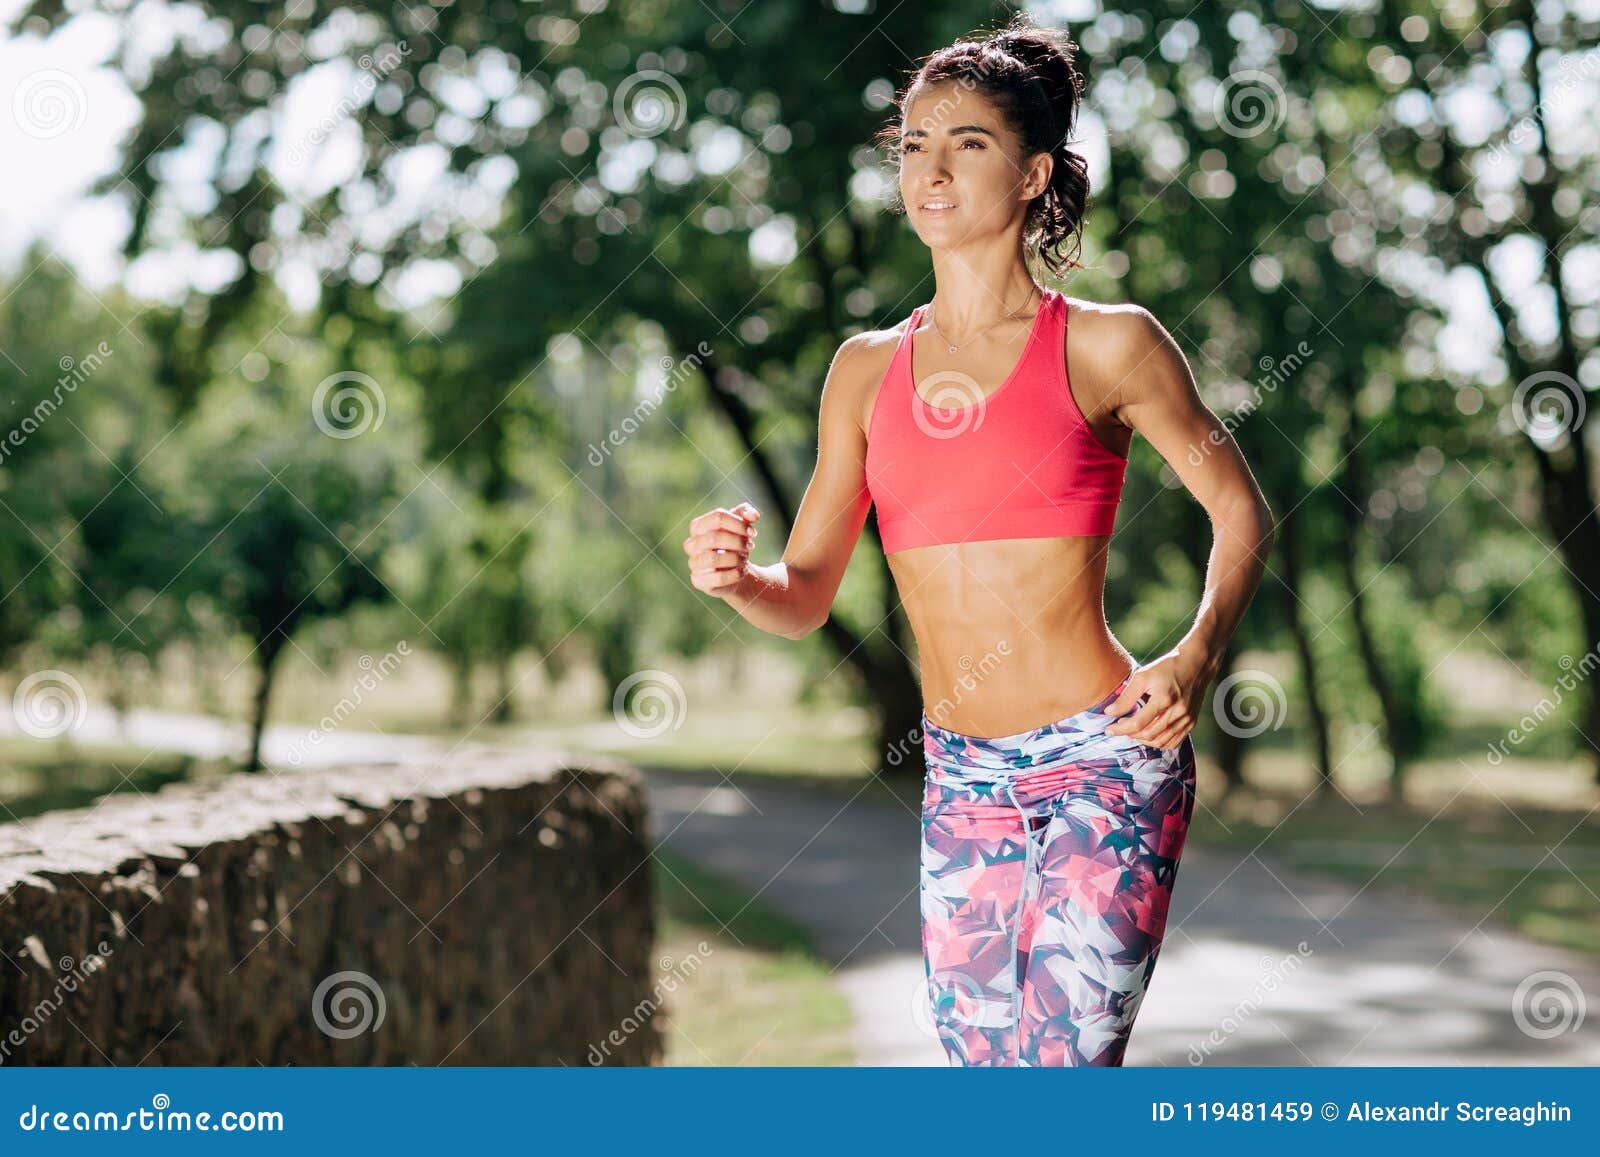 Young Female Runner Jogging during Outdoor Workout in a Park. Beautiful ...